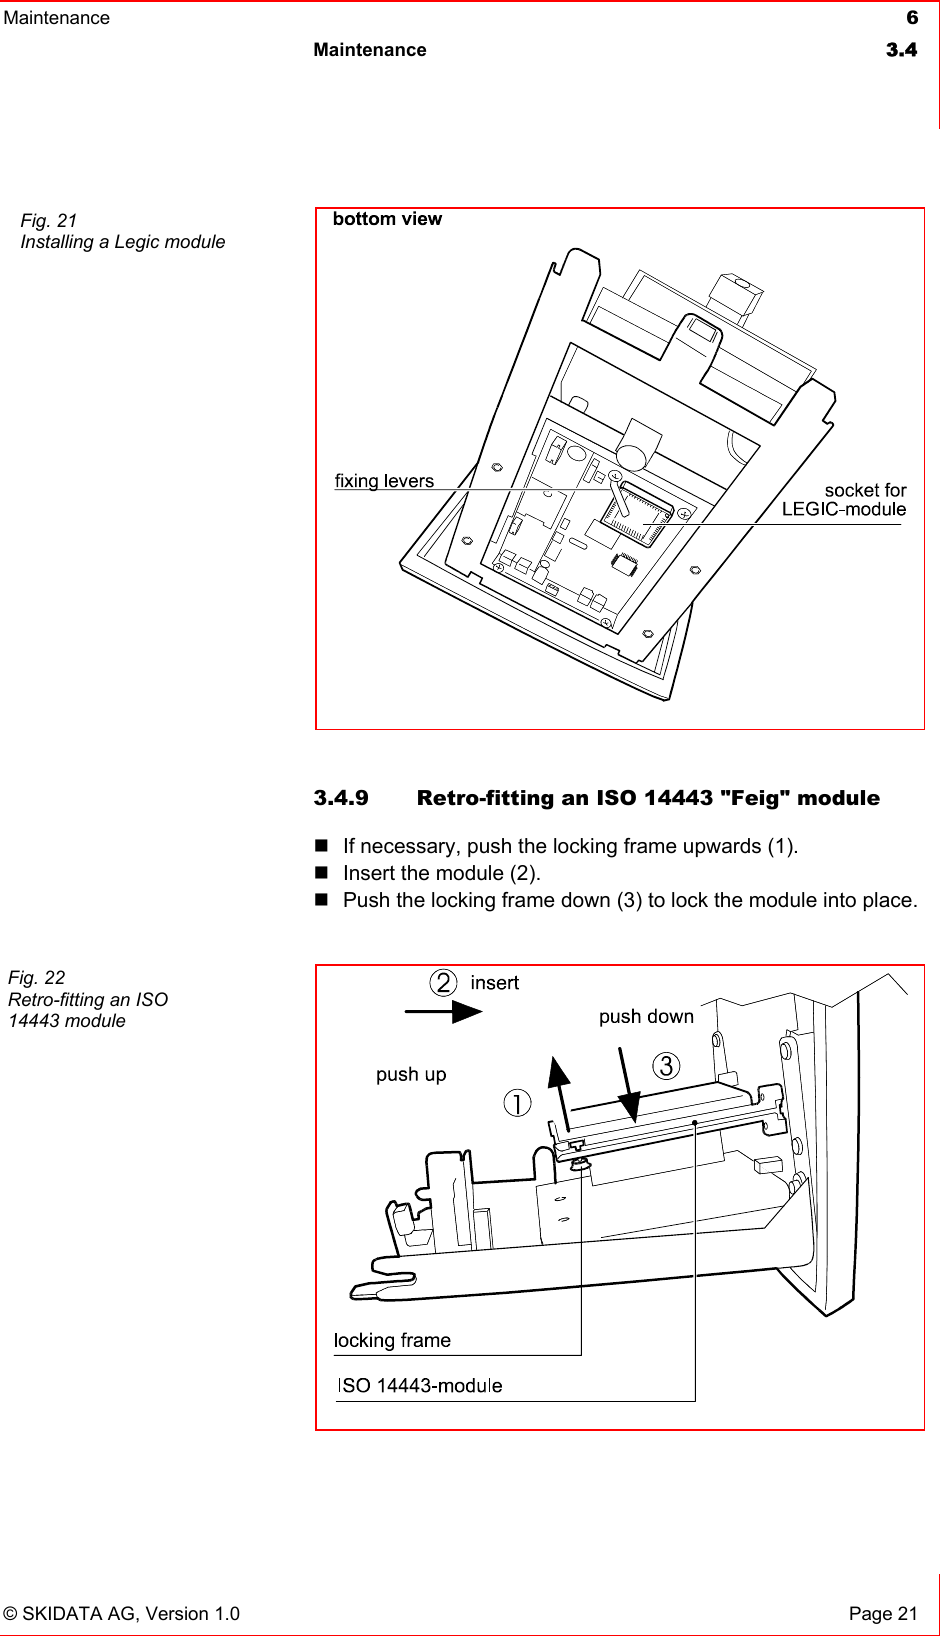 Maintenance  6 Maintenance 3.4   © SKIDATA AG, Version 1.0  Page 21  3.4.9  Retro-fitting an ISO 14443 &quot;Feig&quot; module    If necessary, push the locking frame upwards (1).  Insert the module (2).  Push the locking frame down (3) to lock the module into place.     Fig. 21 Installing a Legic module  Fig. 22 Retro-fitting an ISO 14443 module 